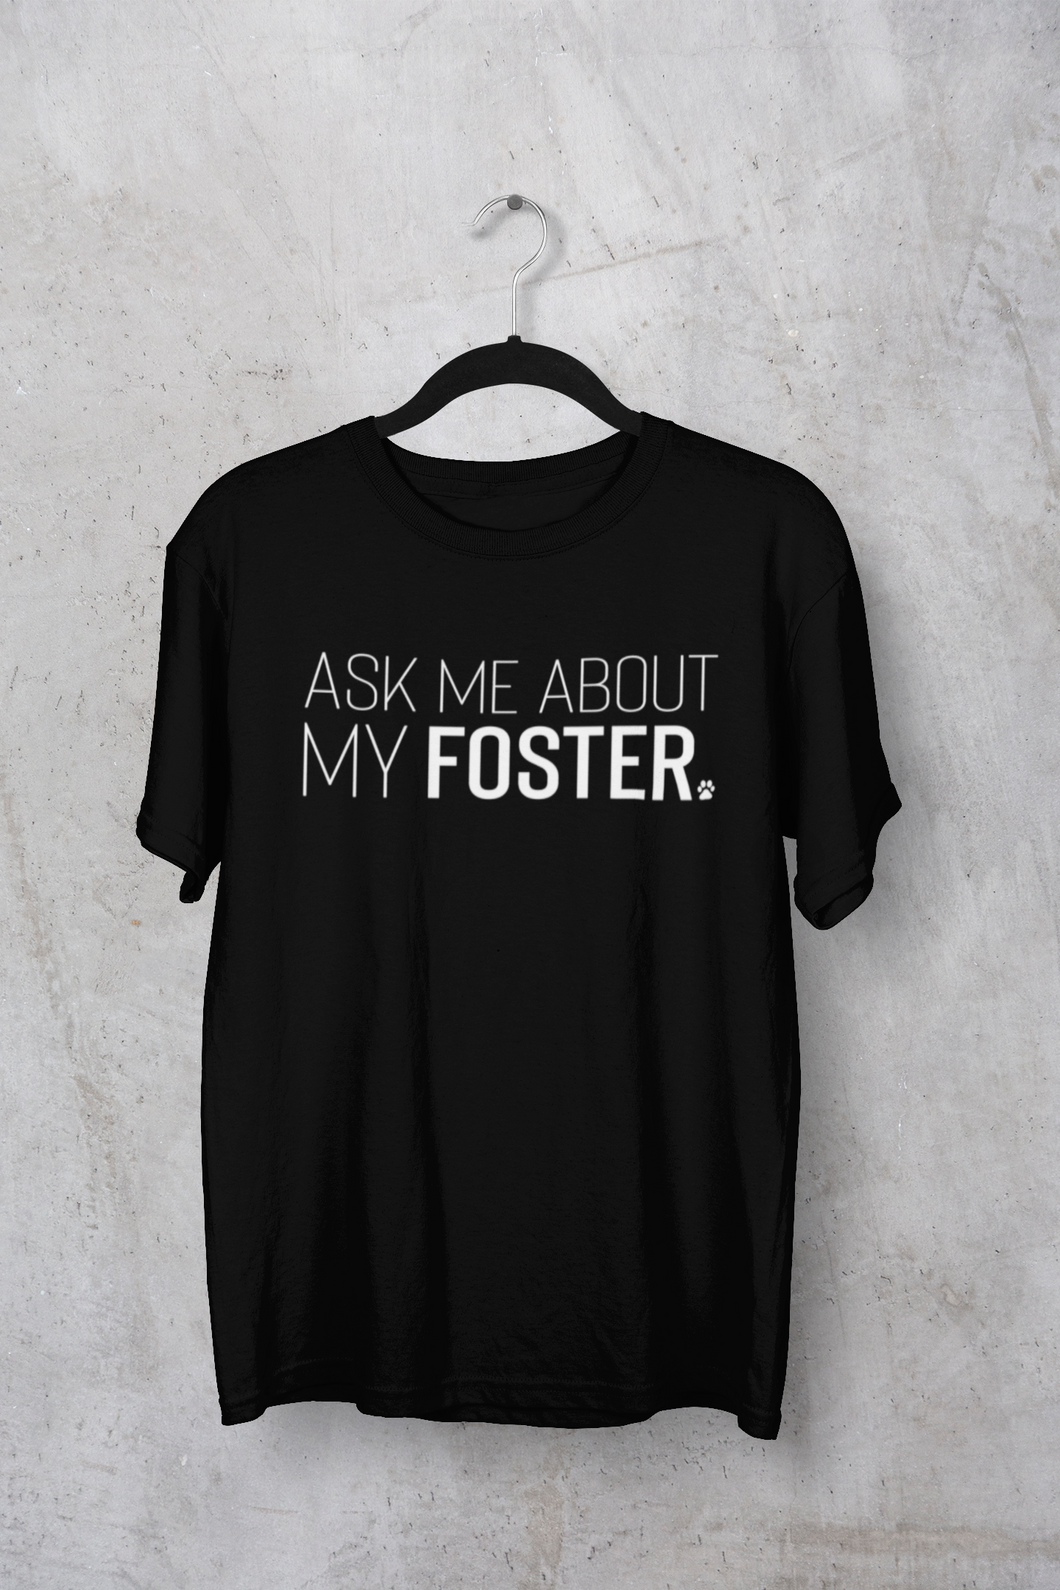 Ask Me About My Foster Men's/Unisex or Women's T-shirt